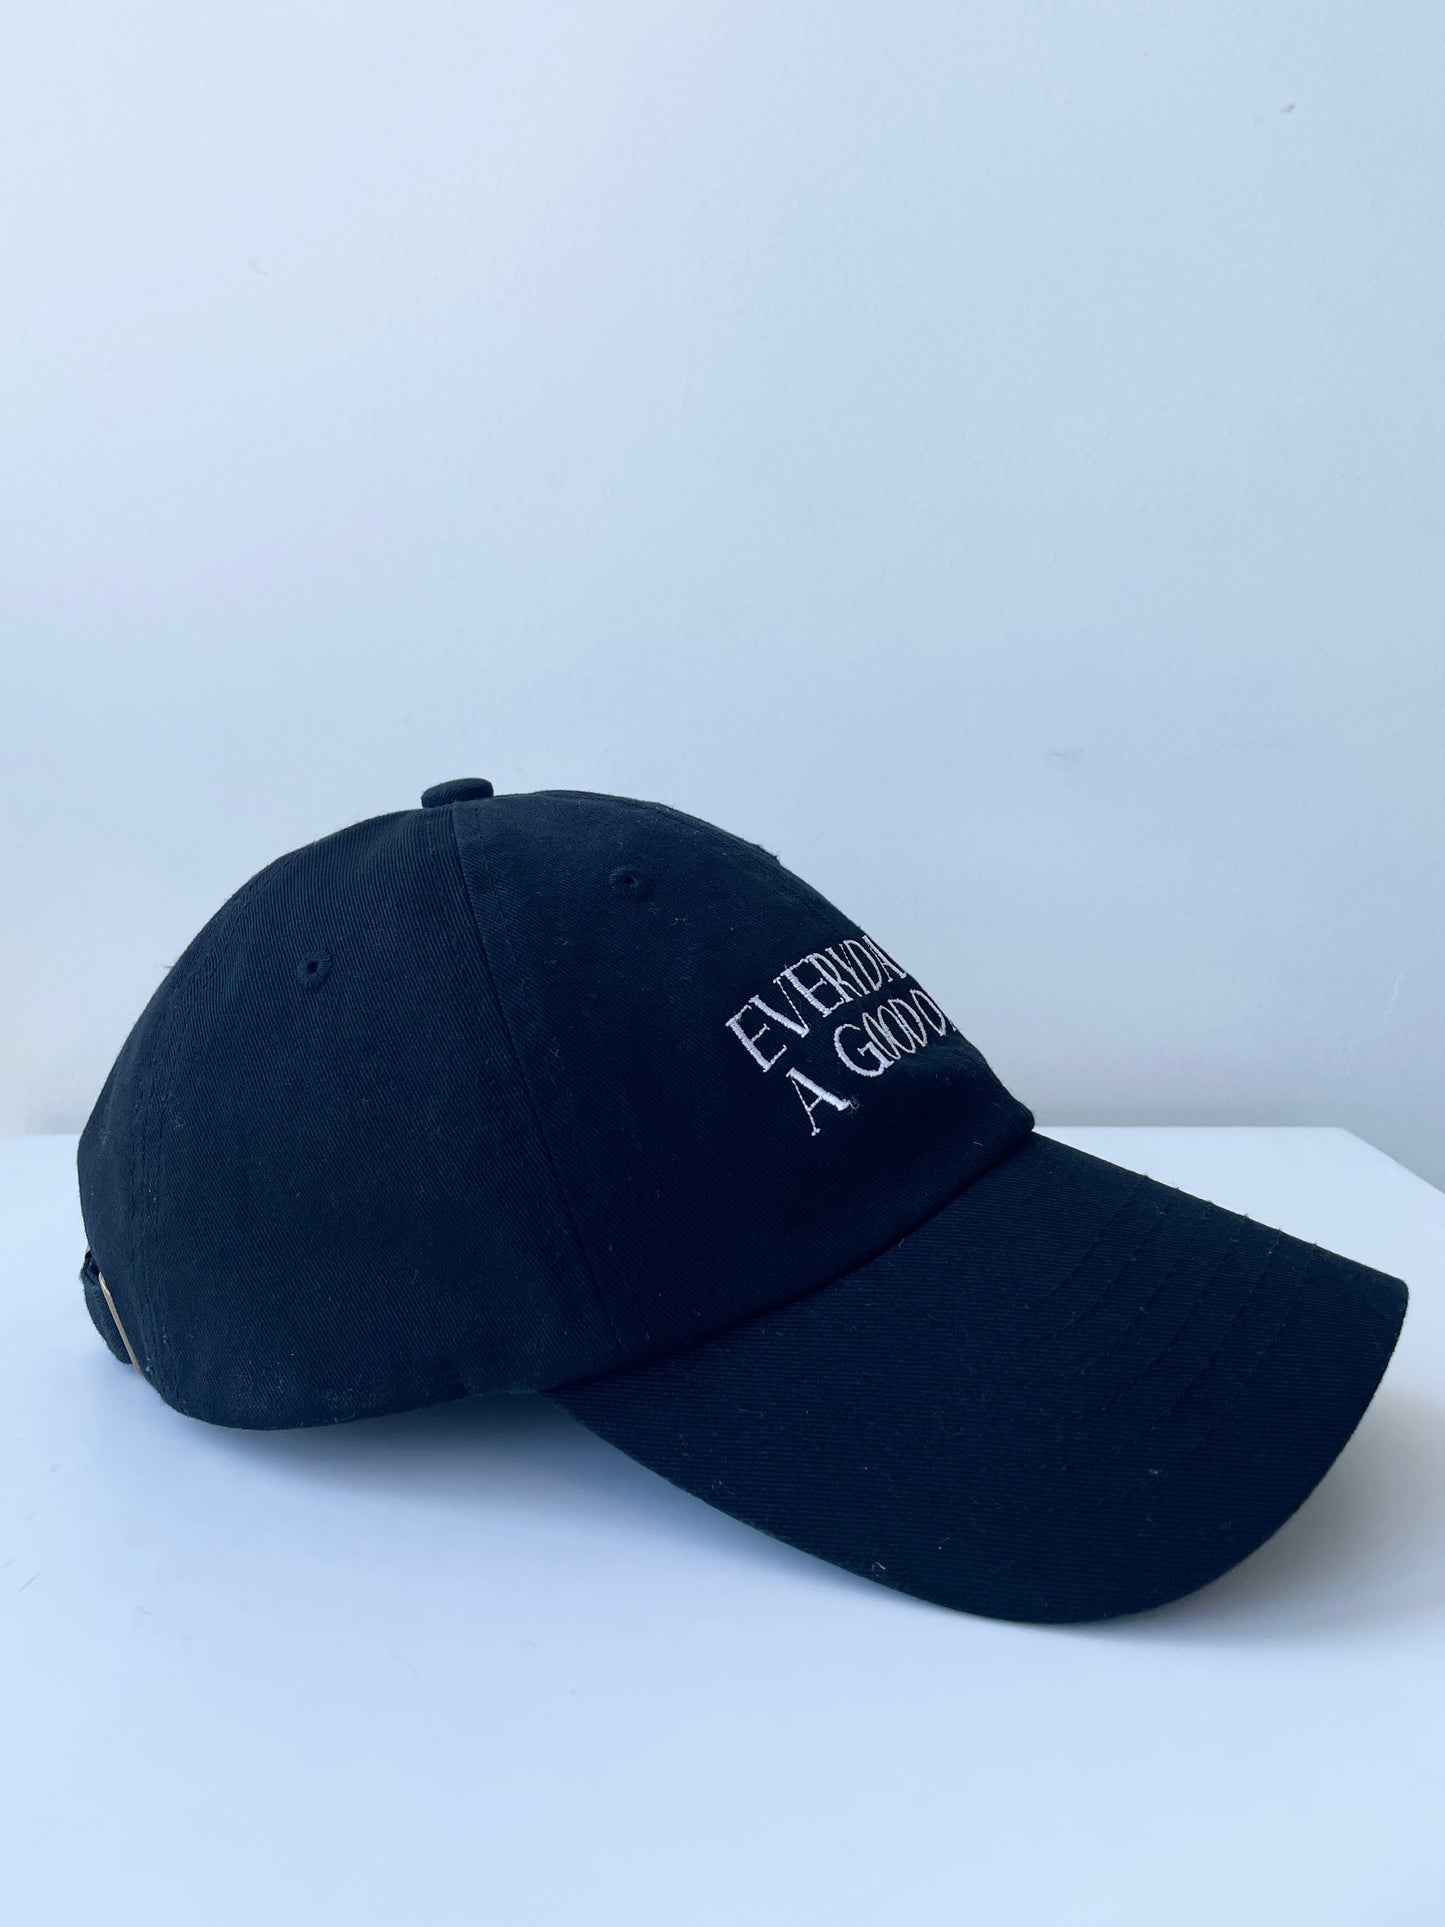 GOOD DAY Embroidery CAP Black